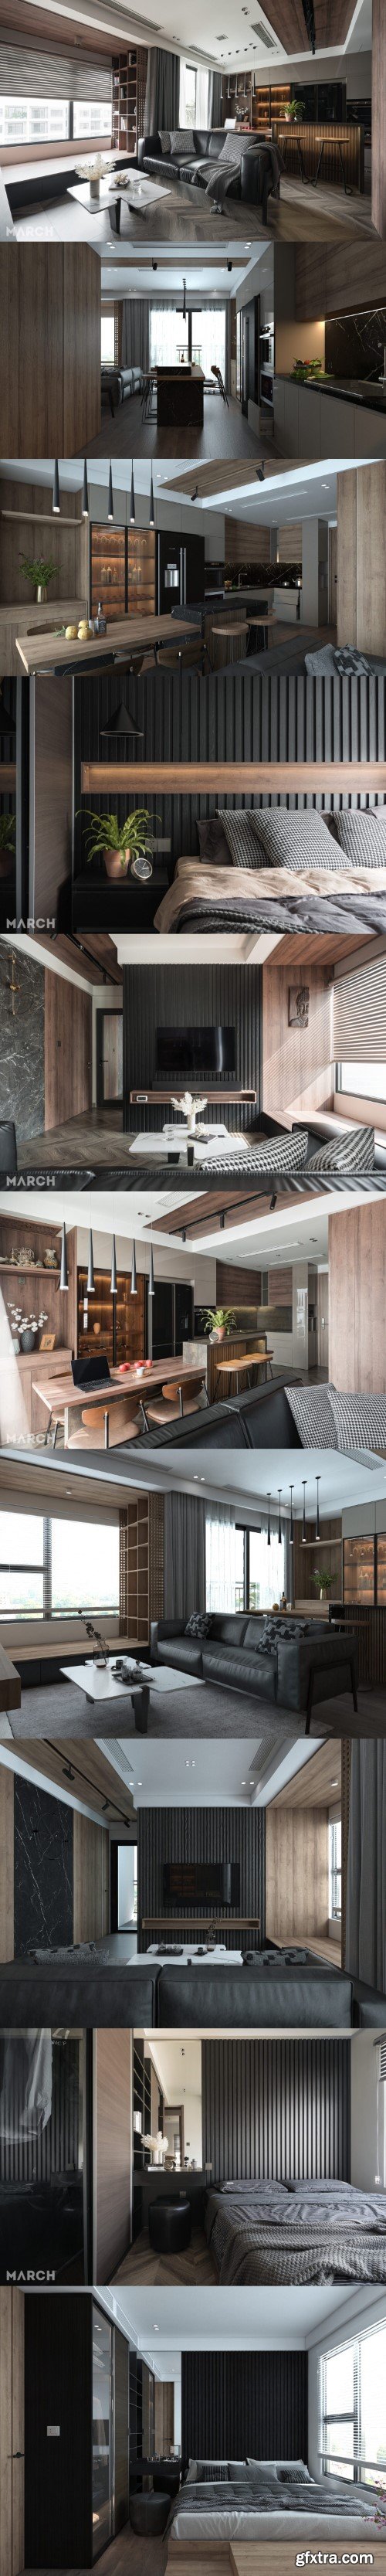 Apartment Interior By Luong Thuy